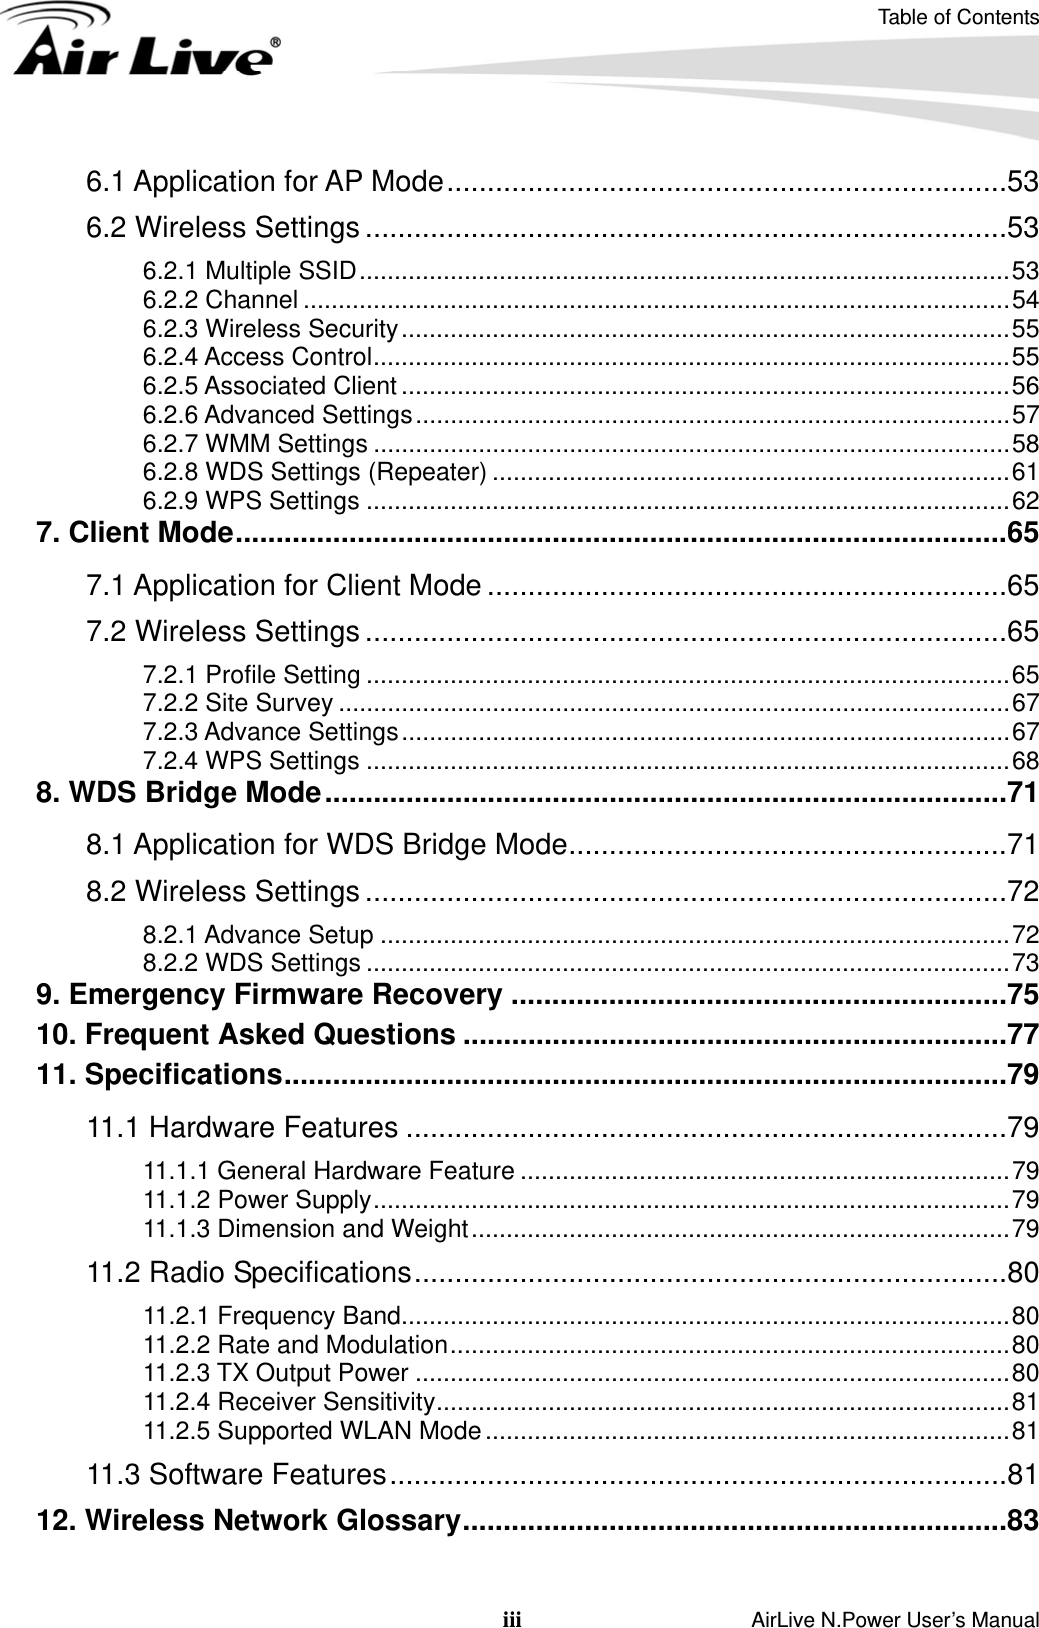 Table of Contents iii                    AirLive N.Power User’s Manual 6.1 Application for AP Mode.....................................................................53 6.2 Wireless Settings ...............................................................................53 6.2.1 Multiple SSID.............................................................................................53 6.2.2 Channel .....................................................................................................54 6.2.3 Wireless Security.......................................................................................55 6.2.4 Access Control...........................................................................................55 6.2.5 Associated Client .......................................................................................56 6.2.6 Advanced Settings.....................................................................................57 6.2.7 WMM Settings ...........................................................................................58 6.2.8 WDS Settings (Repeater) ..........................................................................61 6.2.9 WPS Settings ............................................................................................62 7. Client Mode...............................................................................................65 7.1 Application for Client Mode ................................................................65 7.2 Wireless Settings ...............................................................................65 7.2.1 Profile Setting ............................................................................................65 7.2.2 Site Survey ................................................................................................67 7.2.3 Advance Settings.......................................................................................67 7.2.4 WPS Settings ............................................................................................68 8. WDS Bridge Mode....................................................................................71 8.1 Application for WDS Bridge Mode......................................................71 8.2 Wireless Settings ...............................................................................72 8.2.1 Advance Setup ..........................................................................................72 8.2.2 WDS Settings ............................................................................................73 9. Emergency Firmware Recovery .............................................................75 10. Frequent Asked Questions ...................................................................77 11. Specifications.........................................................................................79 11.1 Hardware Features ..........................................................................79 11.1.1 General Hardware Feature ......................................................................79 11.1.2 Power Supply...........................................................................................79 11.1.3 Dimension and Weight.............................................................................79 11.2 Radio Specifications.........................................................................80 11.2.1 Frequency Band.......................................................................................80 11.2.2 Rate and Modulation................................................................................80 11.2.3 TX Output Power .....................................................................................80 11.2.4 Receiver Sensitivity..................................................................................81 11.2.5 Supported WLAN Mode ...........................................................................81 11.3 Software Features............................................................................81 12. Wireless Network Glossary...................................................................83  